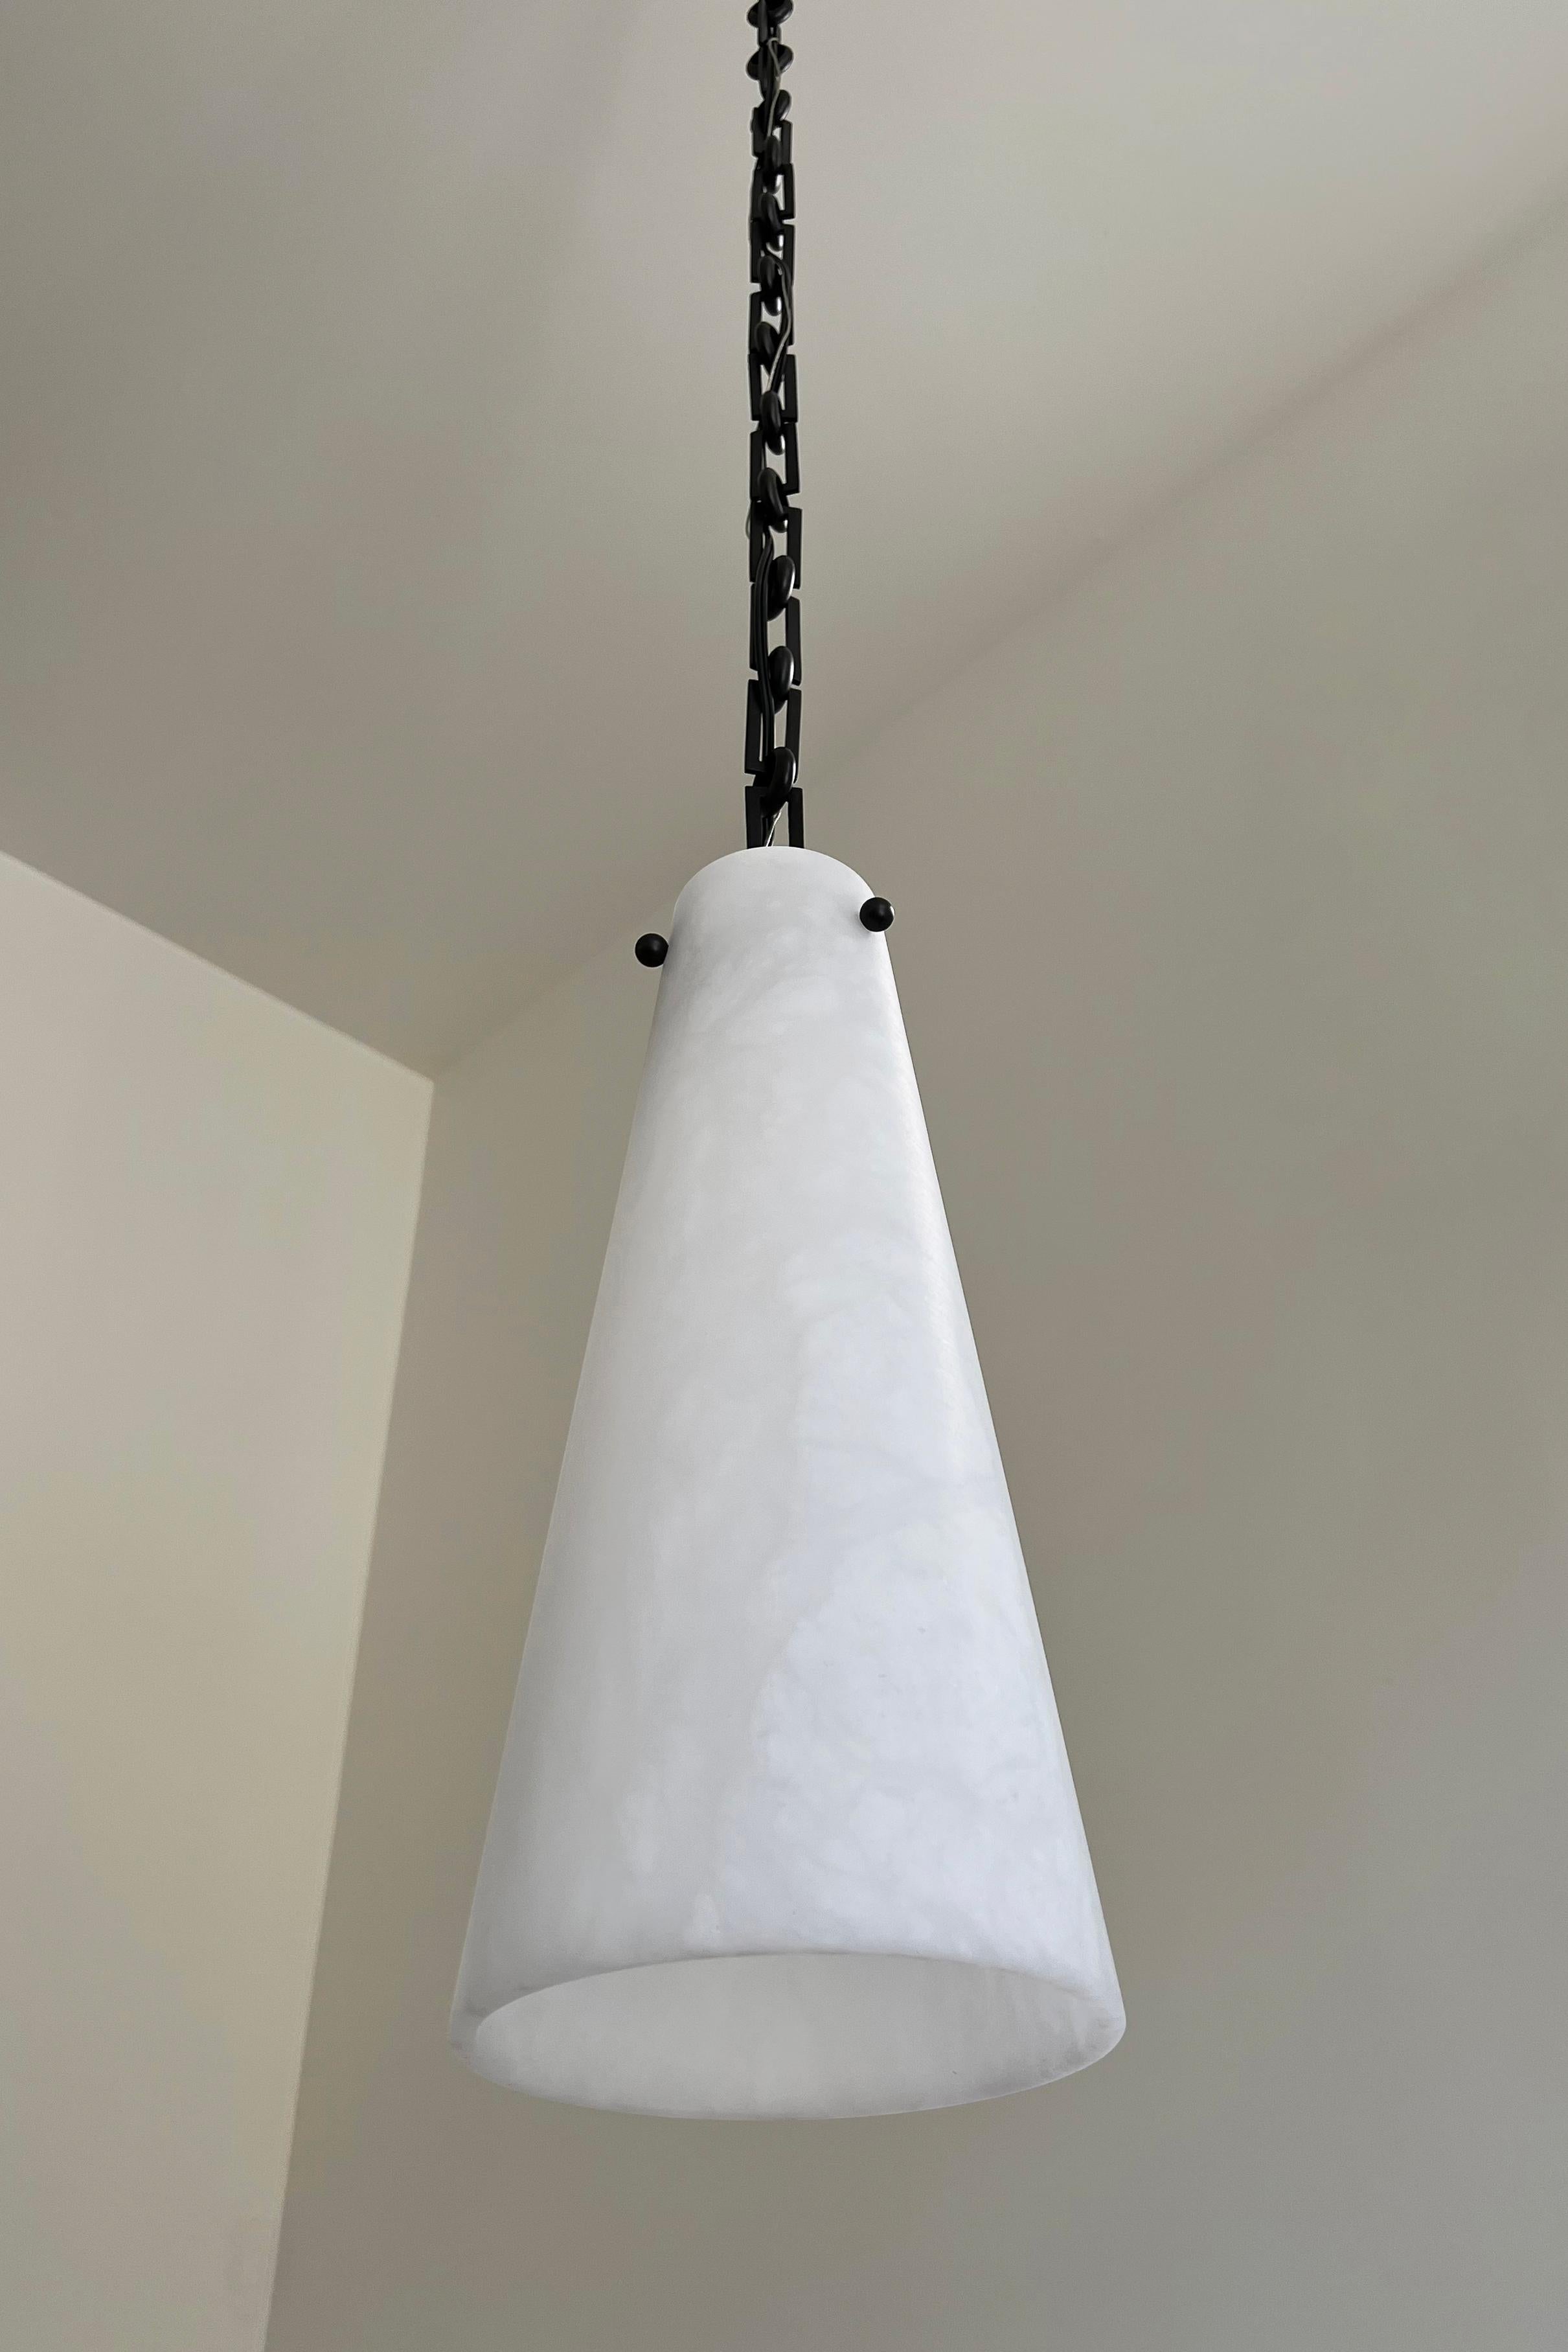 Blackened Contemporary Lucca Pendant 202A in Alabaster by Orphan Work, 2021 For Sale